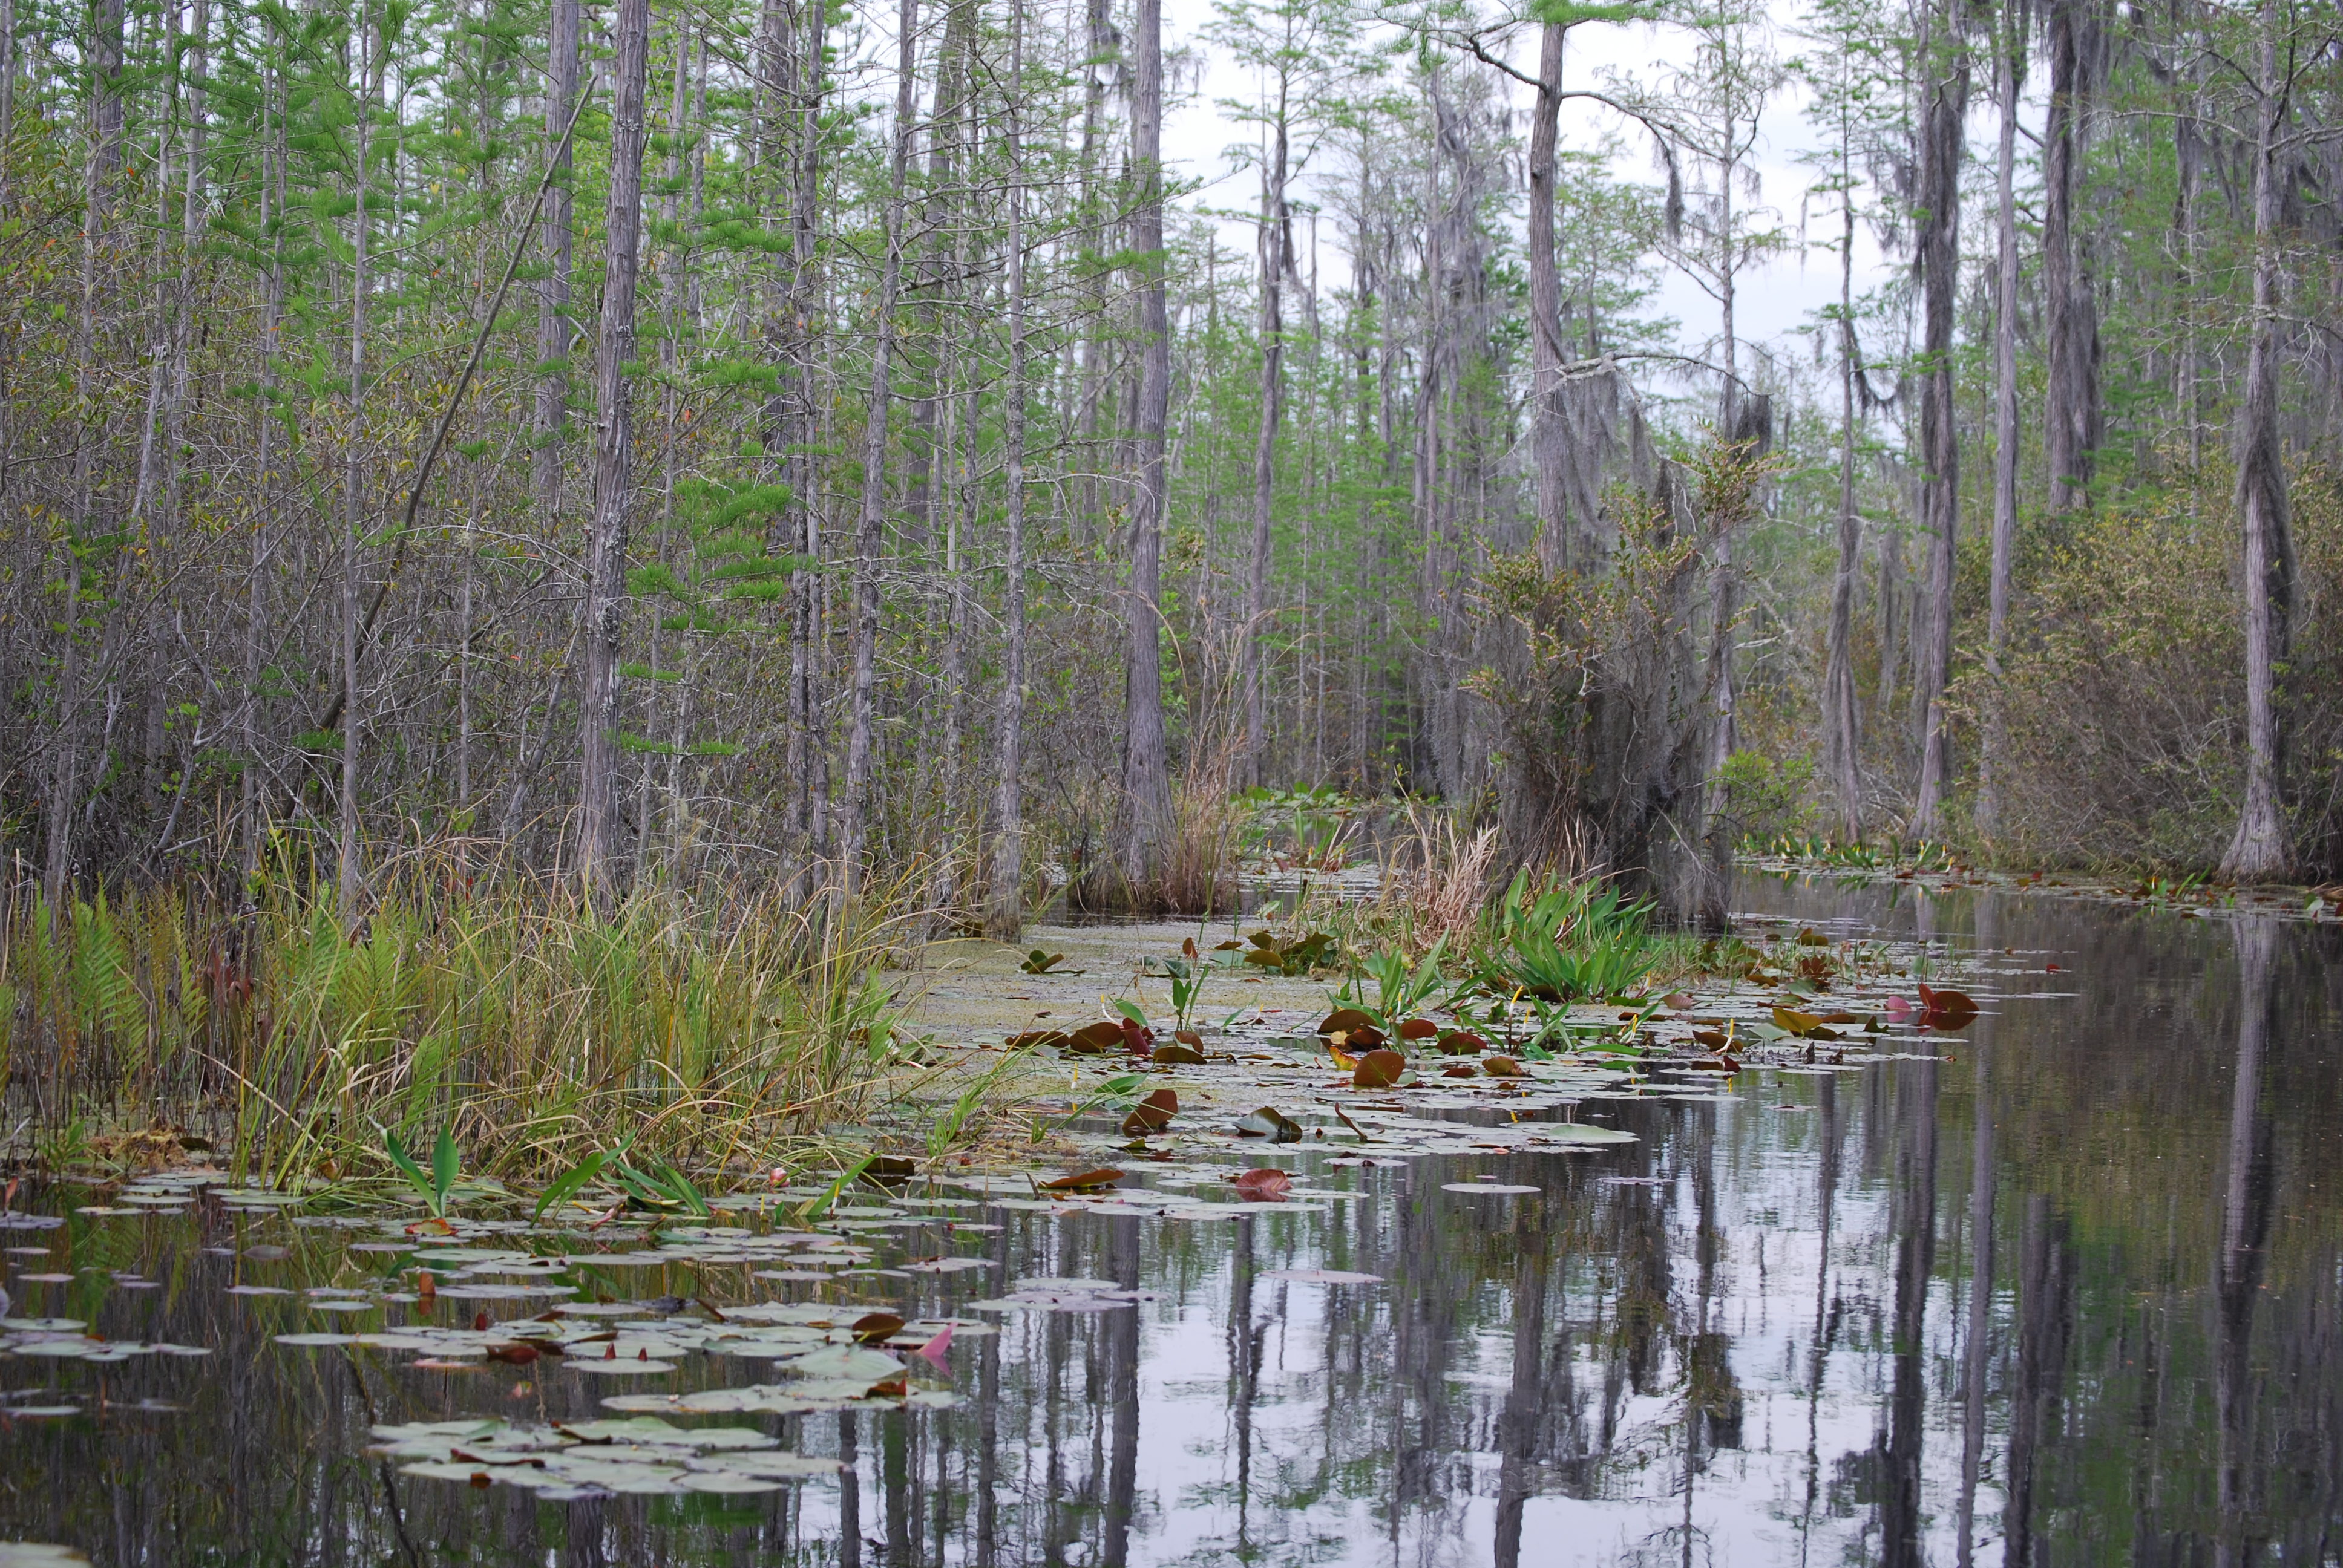 A river in the Okefenokee Swamp.